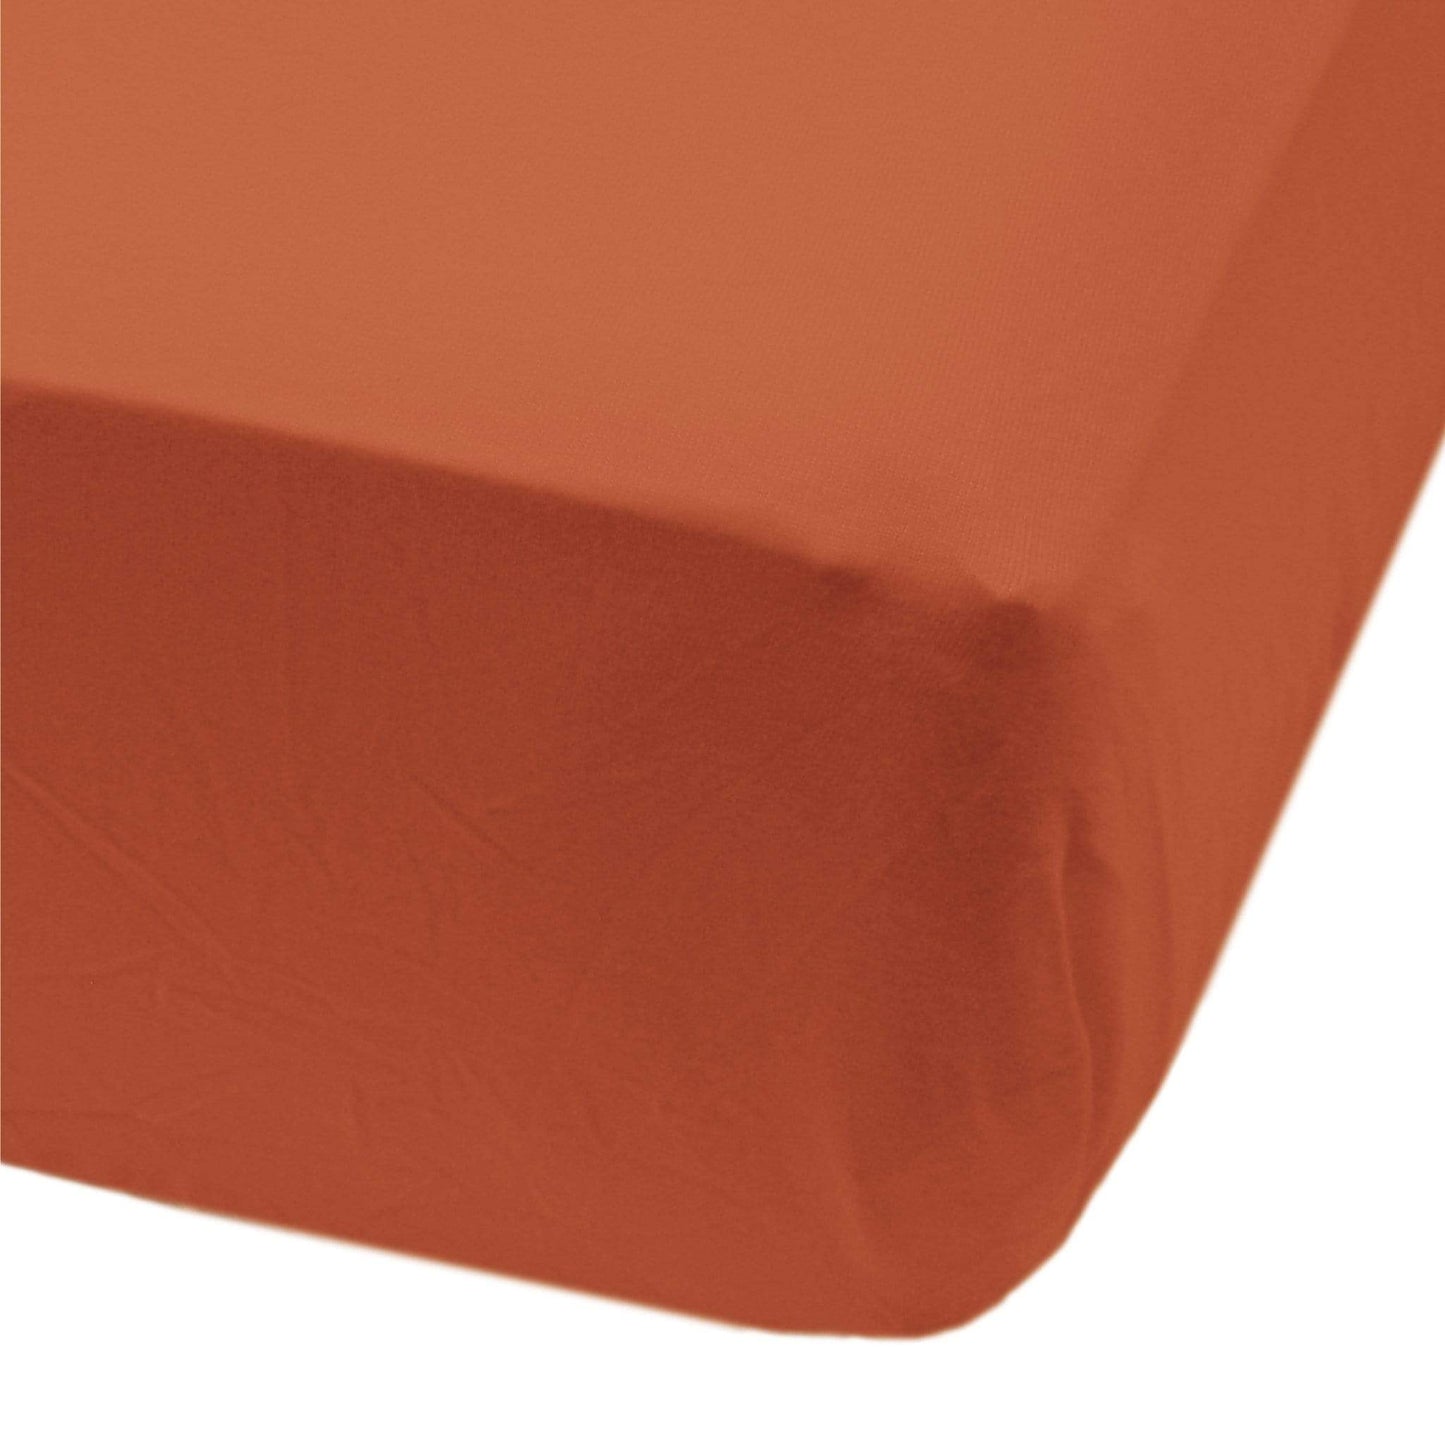 Crib fitted sheet - Rust